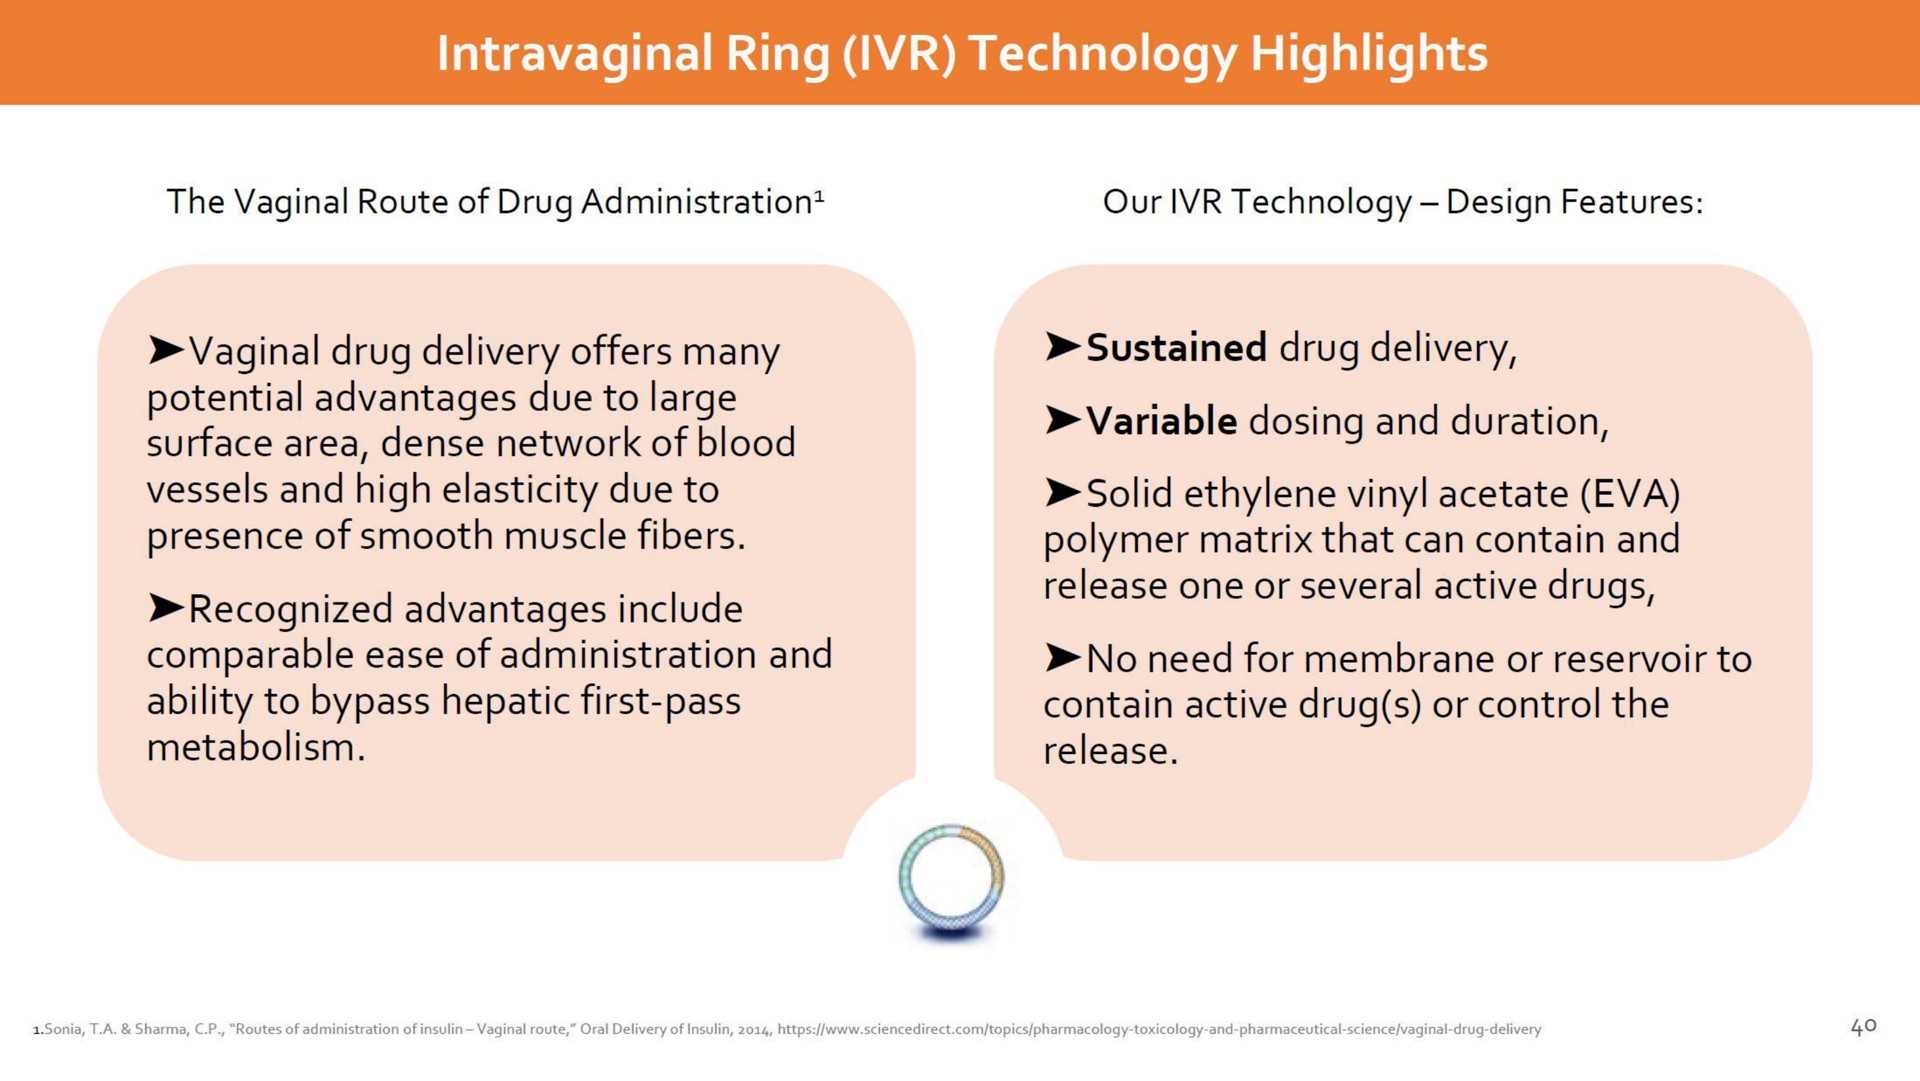 intravaginal ring technology highlights vaginal drug delivery offers many potential advantages due to large surface area dense network of blood vessels and high elasticity due to presence of smooth muscle fibers recognized advantages include comparable ease of administration and ability to bypass hepatic first pass metabolism sustained drug delivery variable dosing and duration solid ethylene vinyl acetate polymer matrix that can contain and release one or several active drugs contain active drug or control the | Dare Bioscience